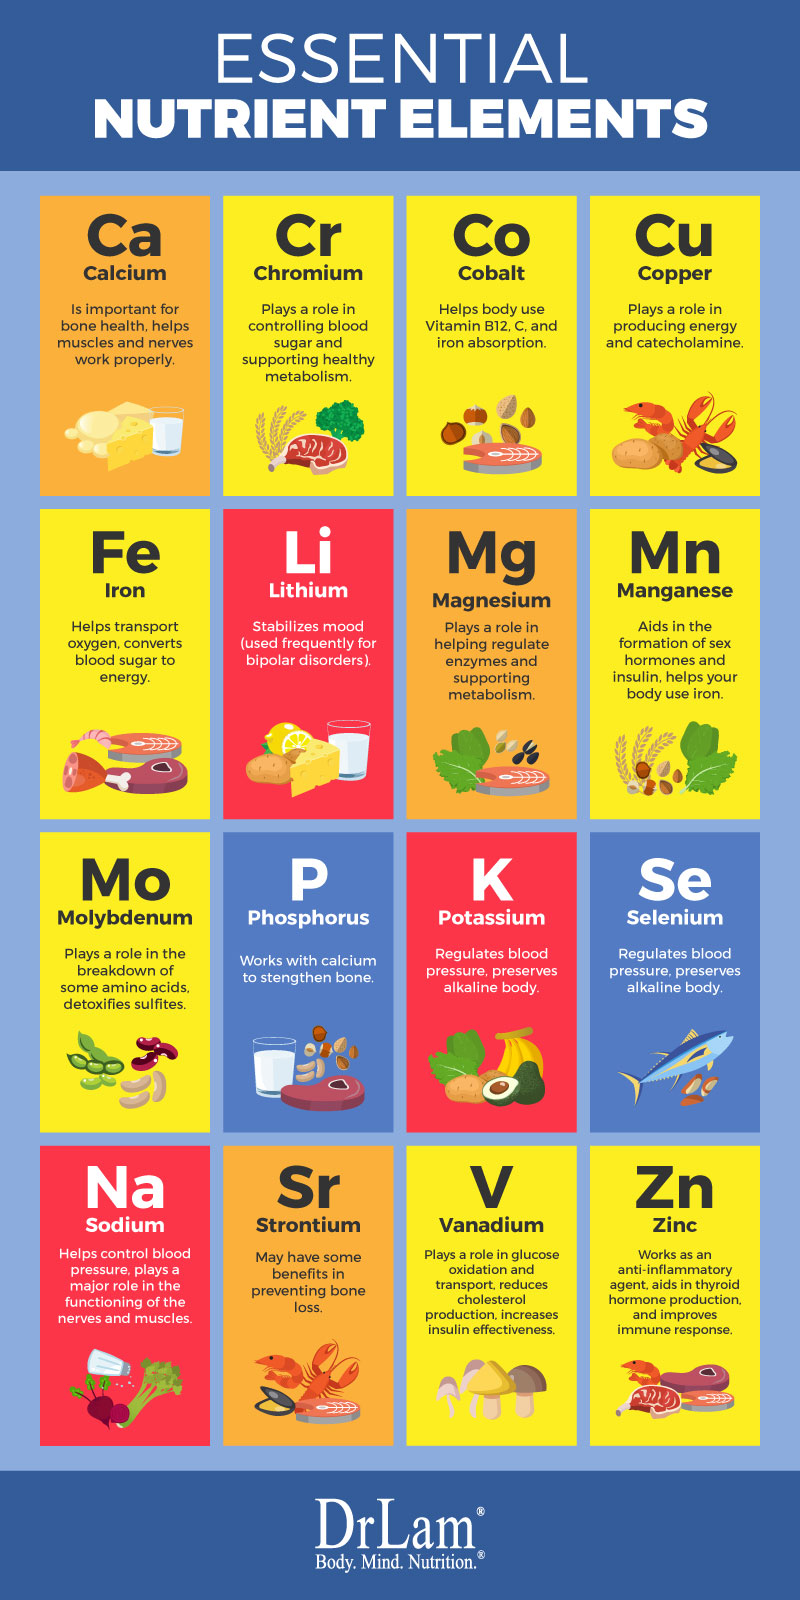 Check out this easy to understand infographic about the essential nutrient elements